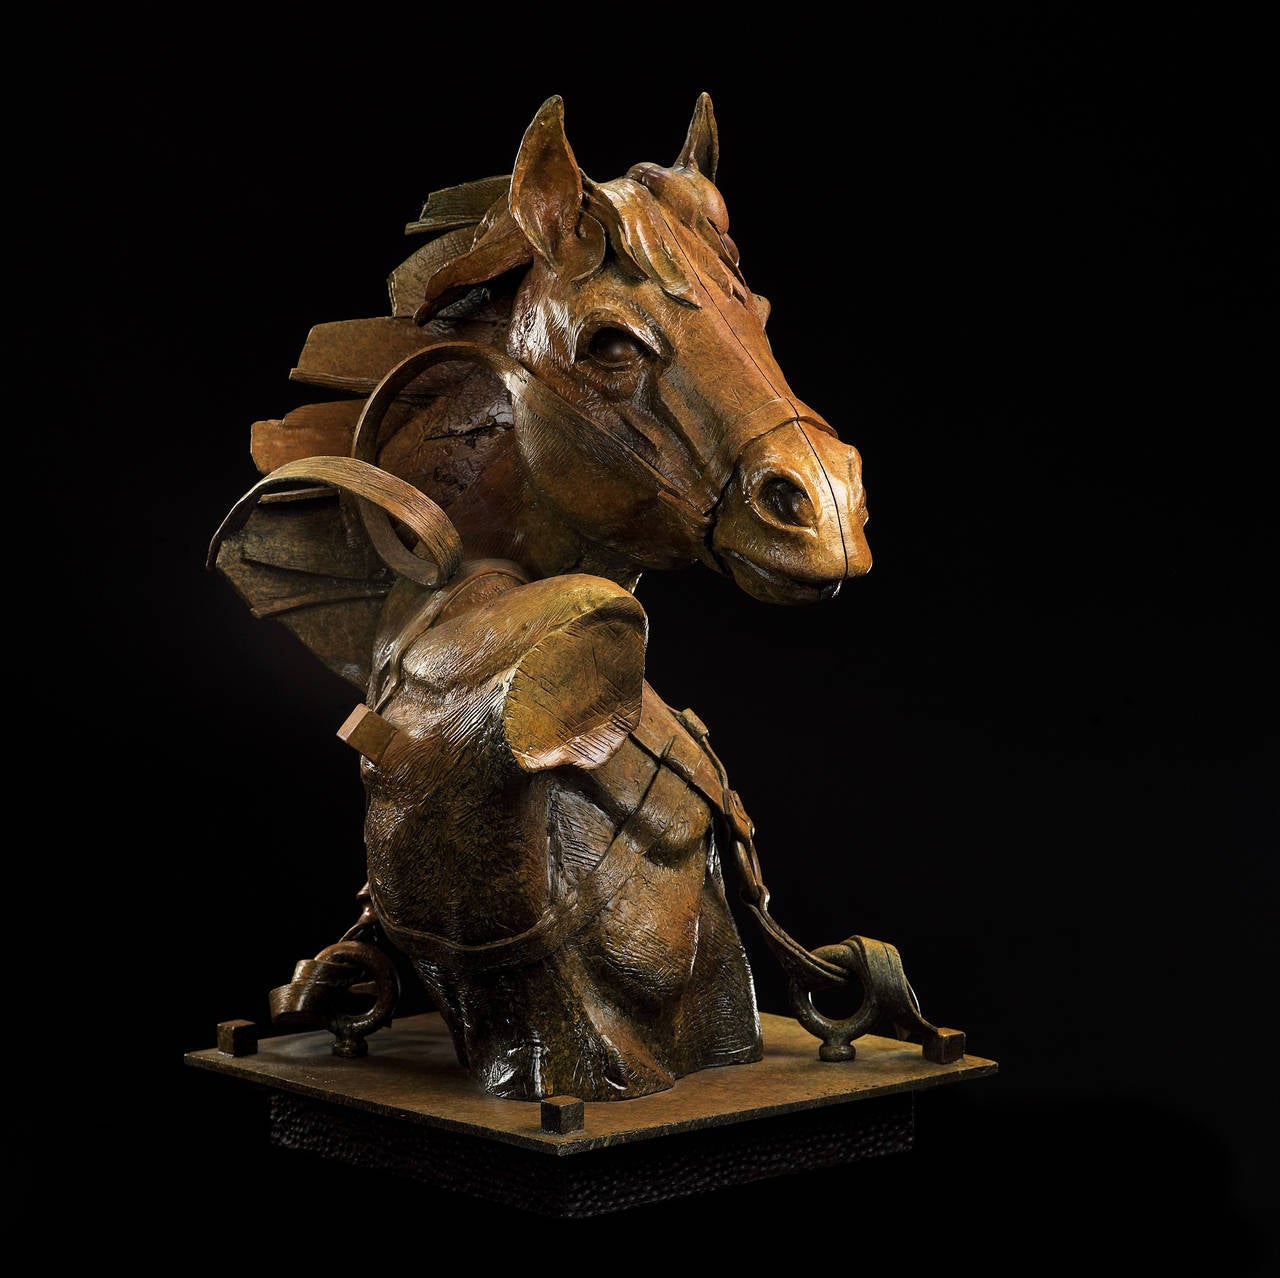 Equine Passenger - Sculpture by Ted Gall